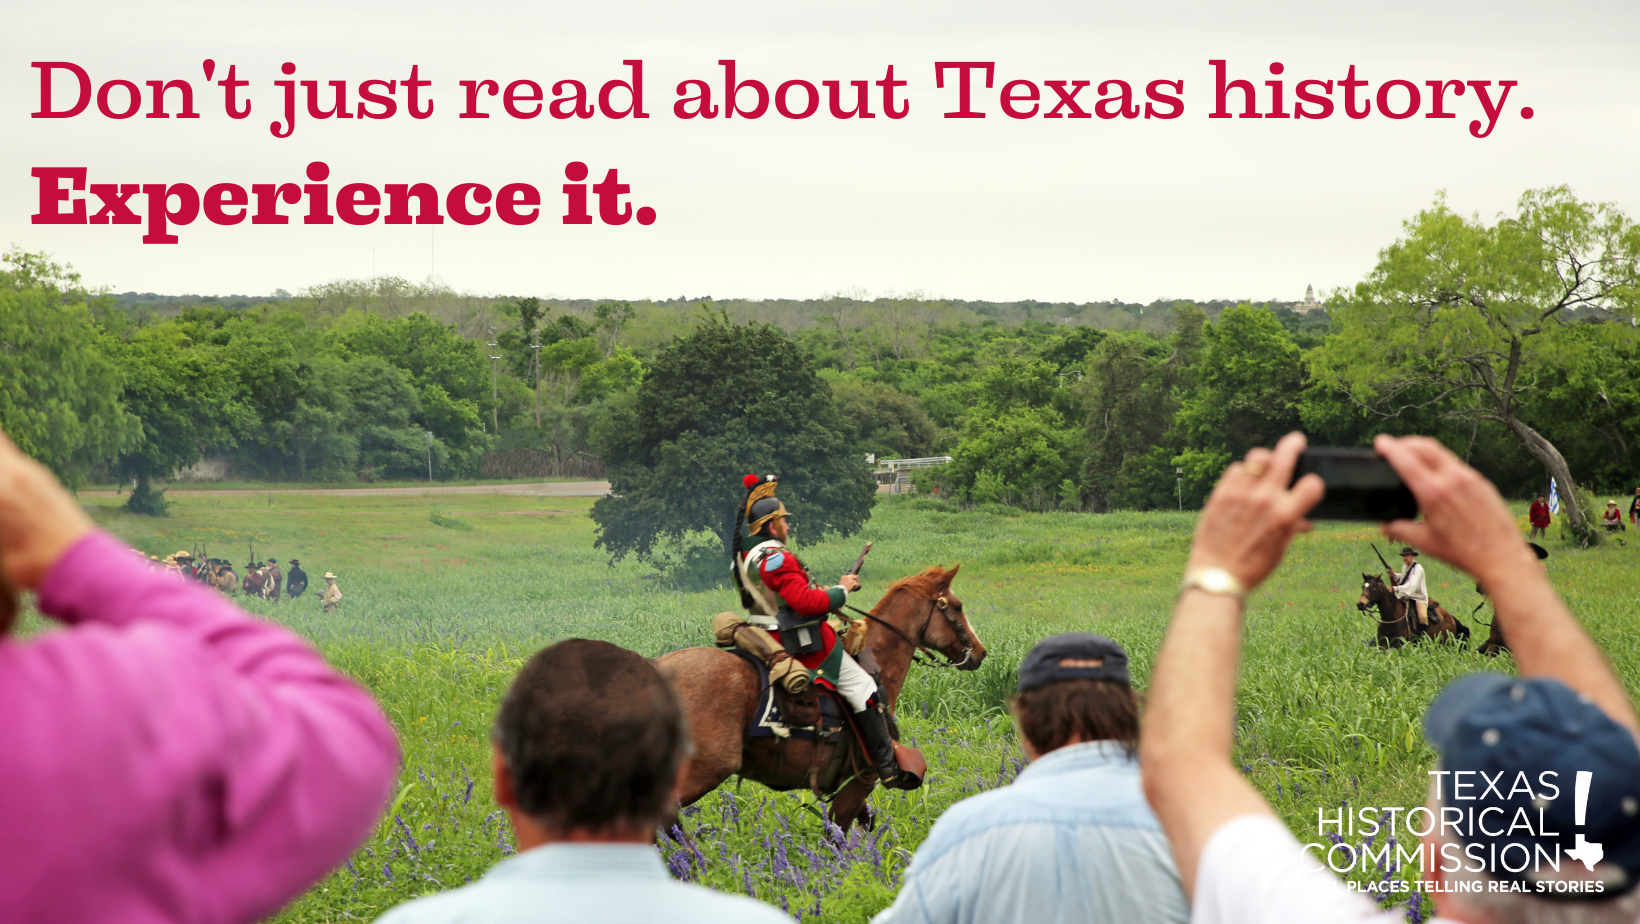 "Don't just read about Texas history. Experience it." over a photo of a battle reenactment. 